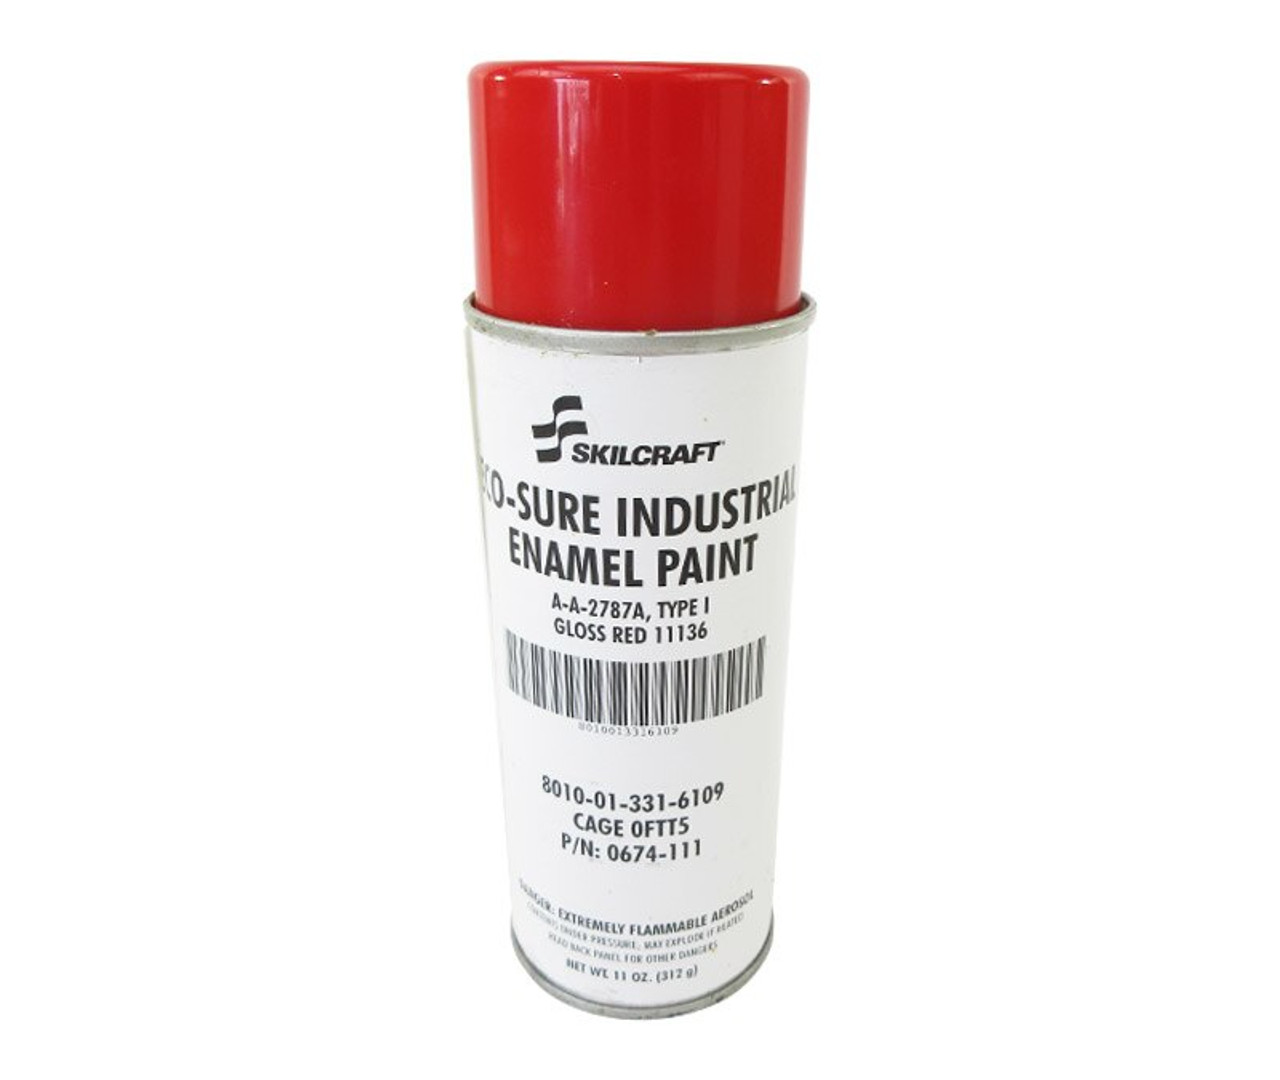 Skilcraft 0674-370 ECO SURE FS 37875 Flat White A-A-2787A Type I Spec  Industrial Enamel Paint - 11 oz Aerosol Can at